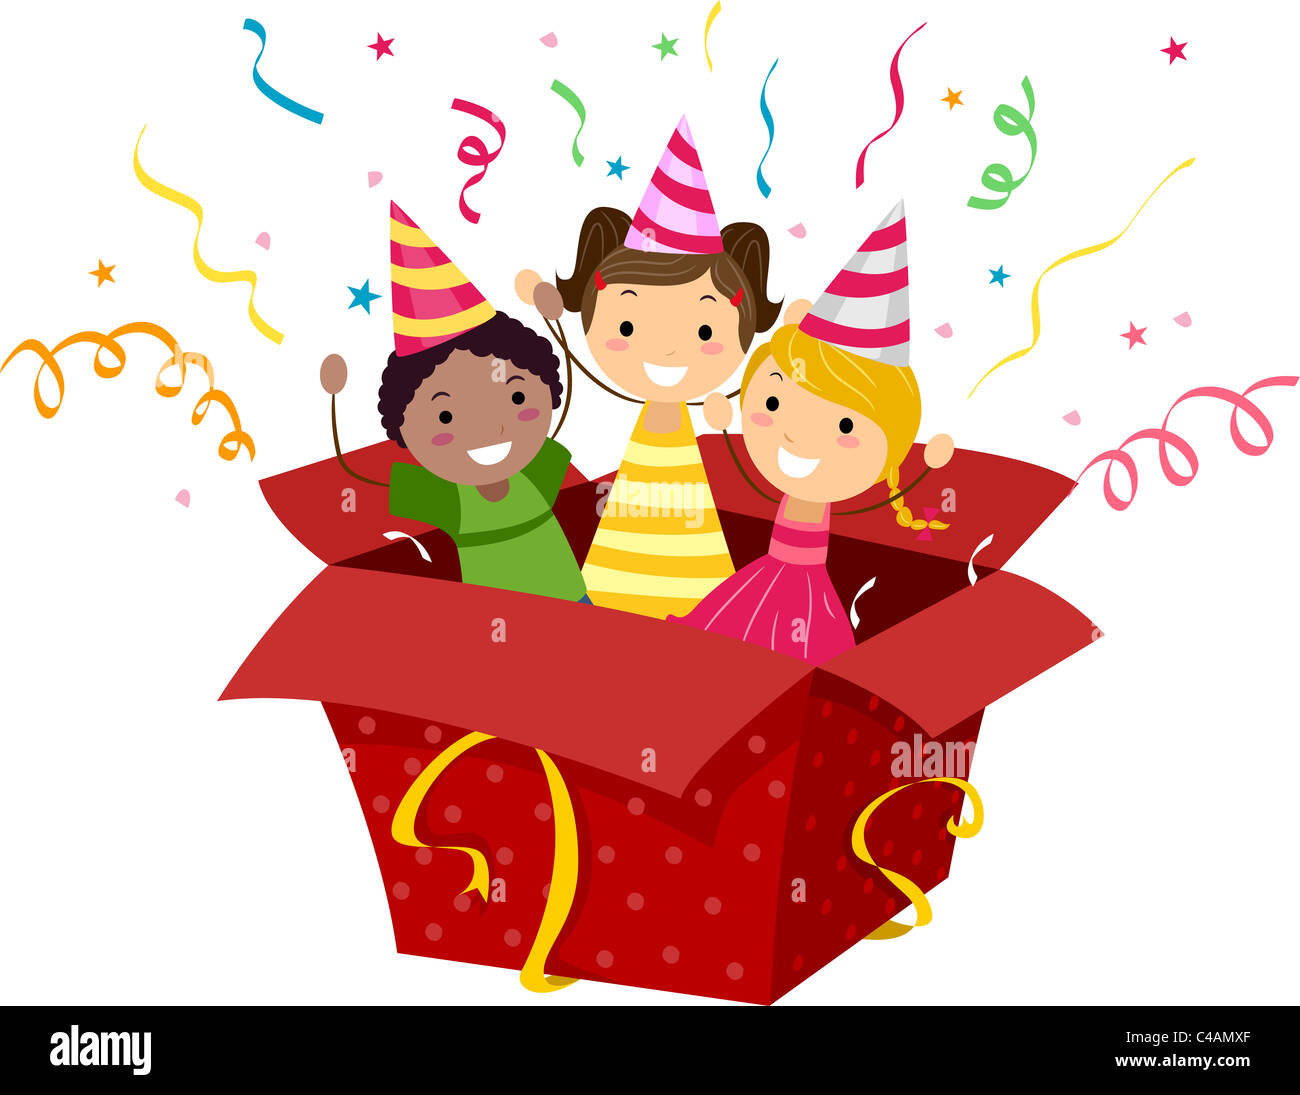 Illustration of Kids Popping Out of a Gift Box Stock Photo - Alamy